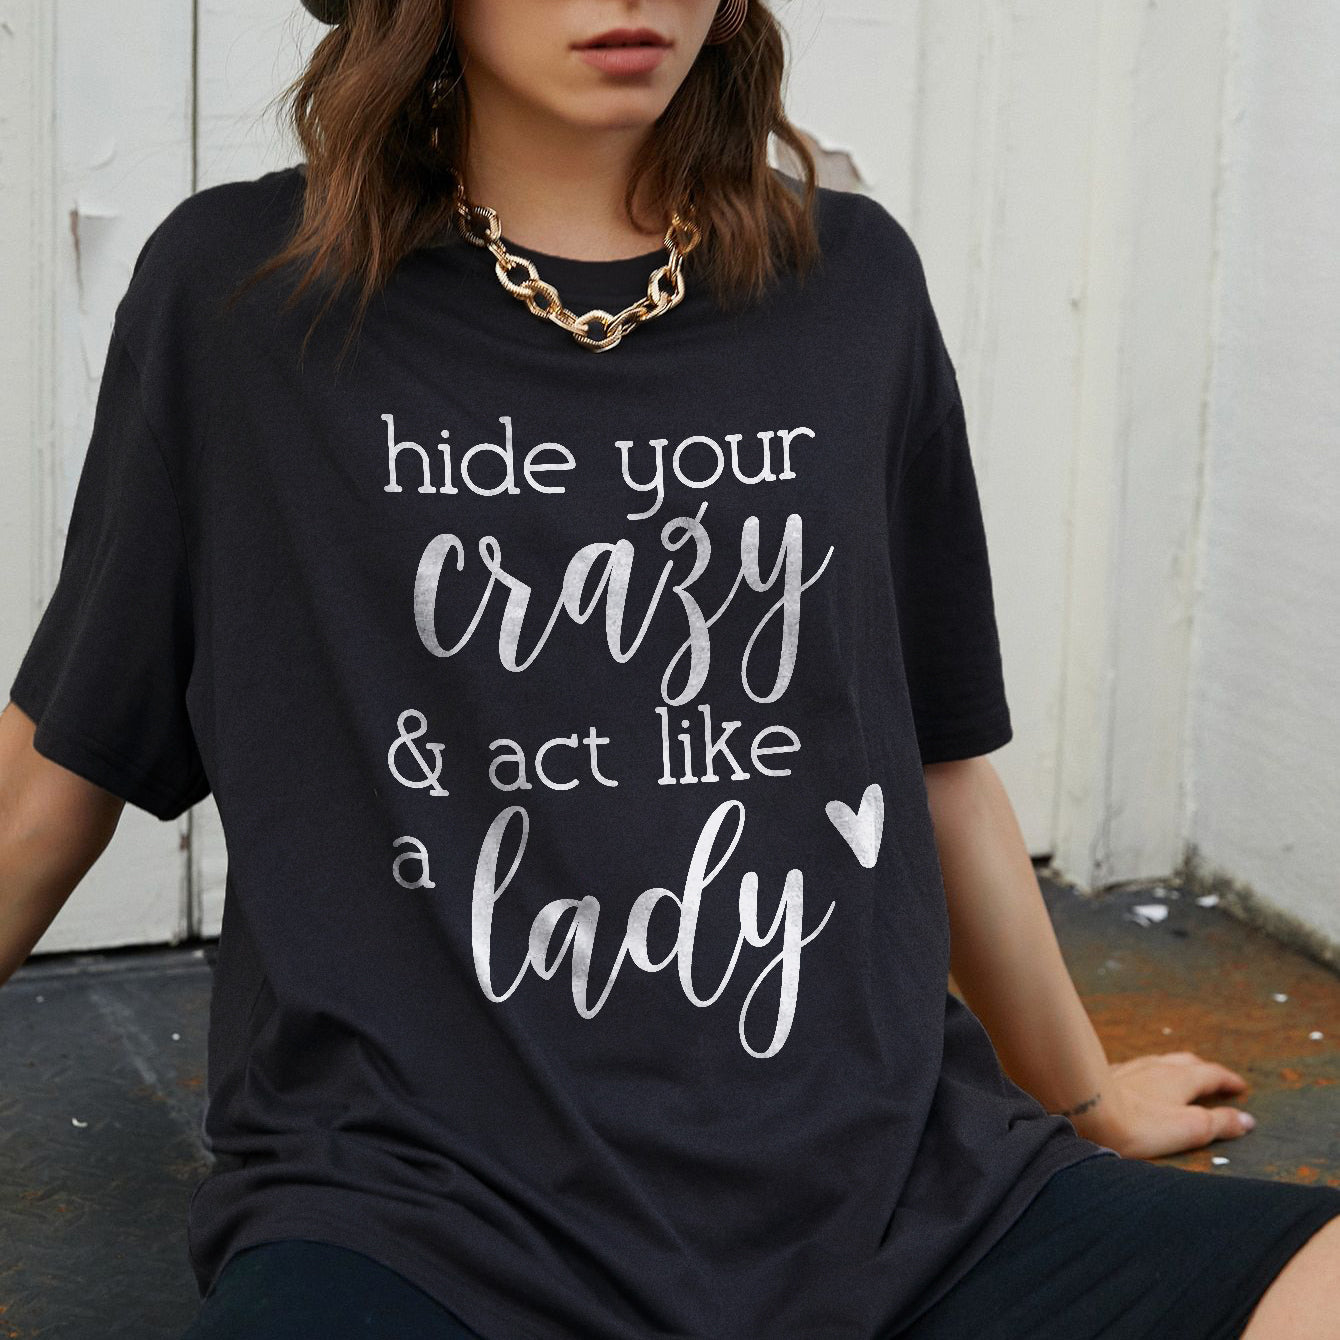 Hide Your Crazy & Act Like a Lady T-shirt - Saskull